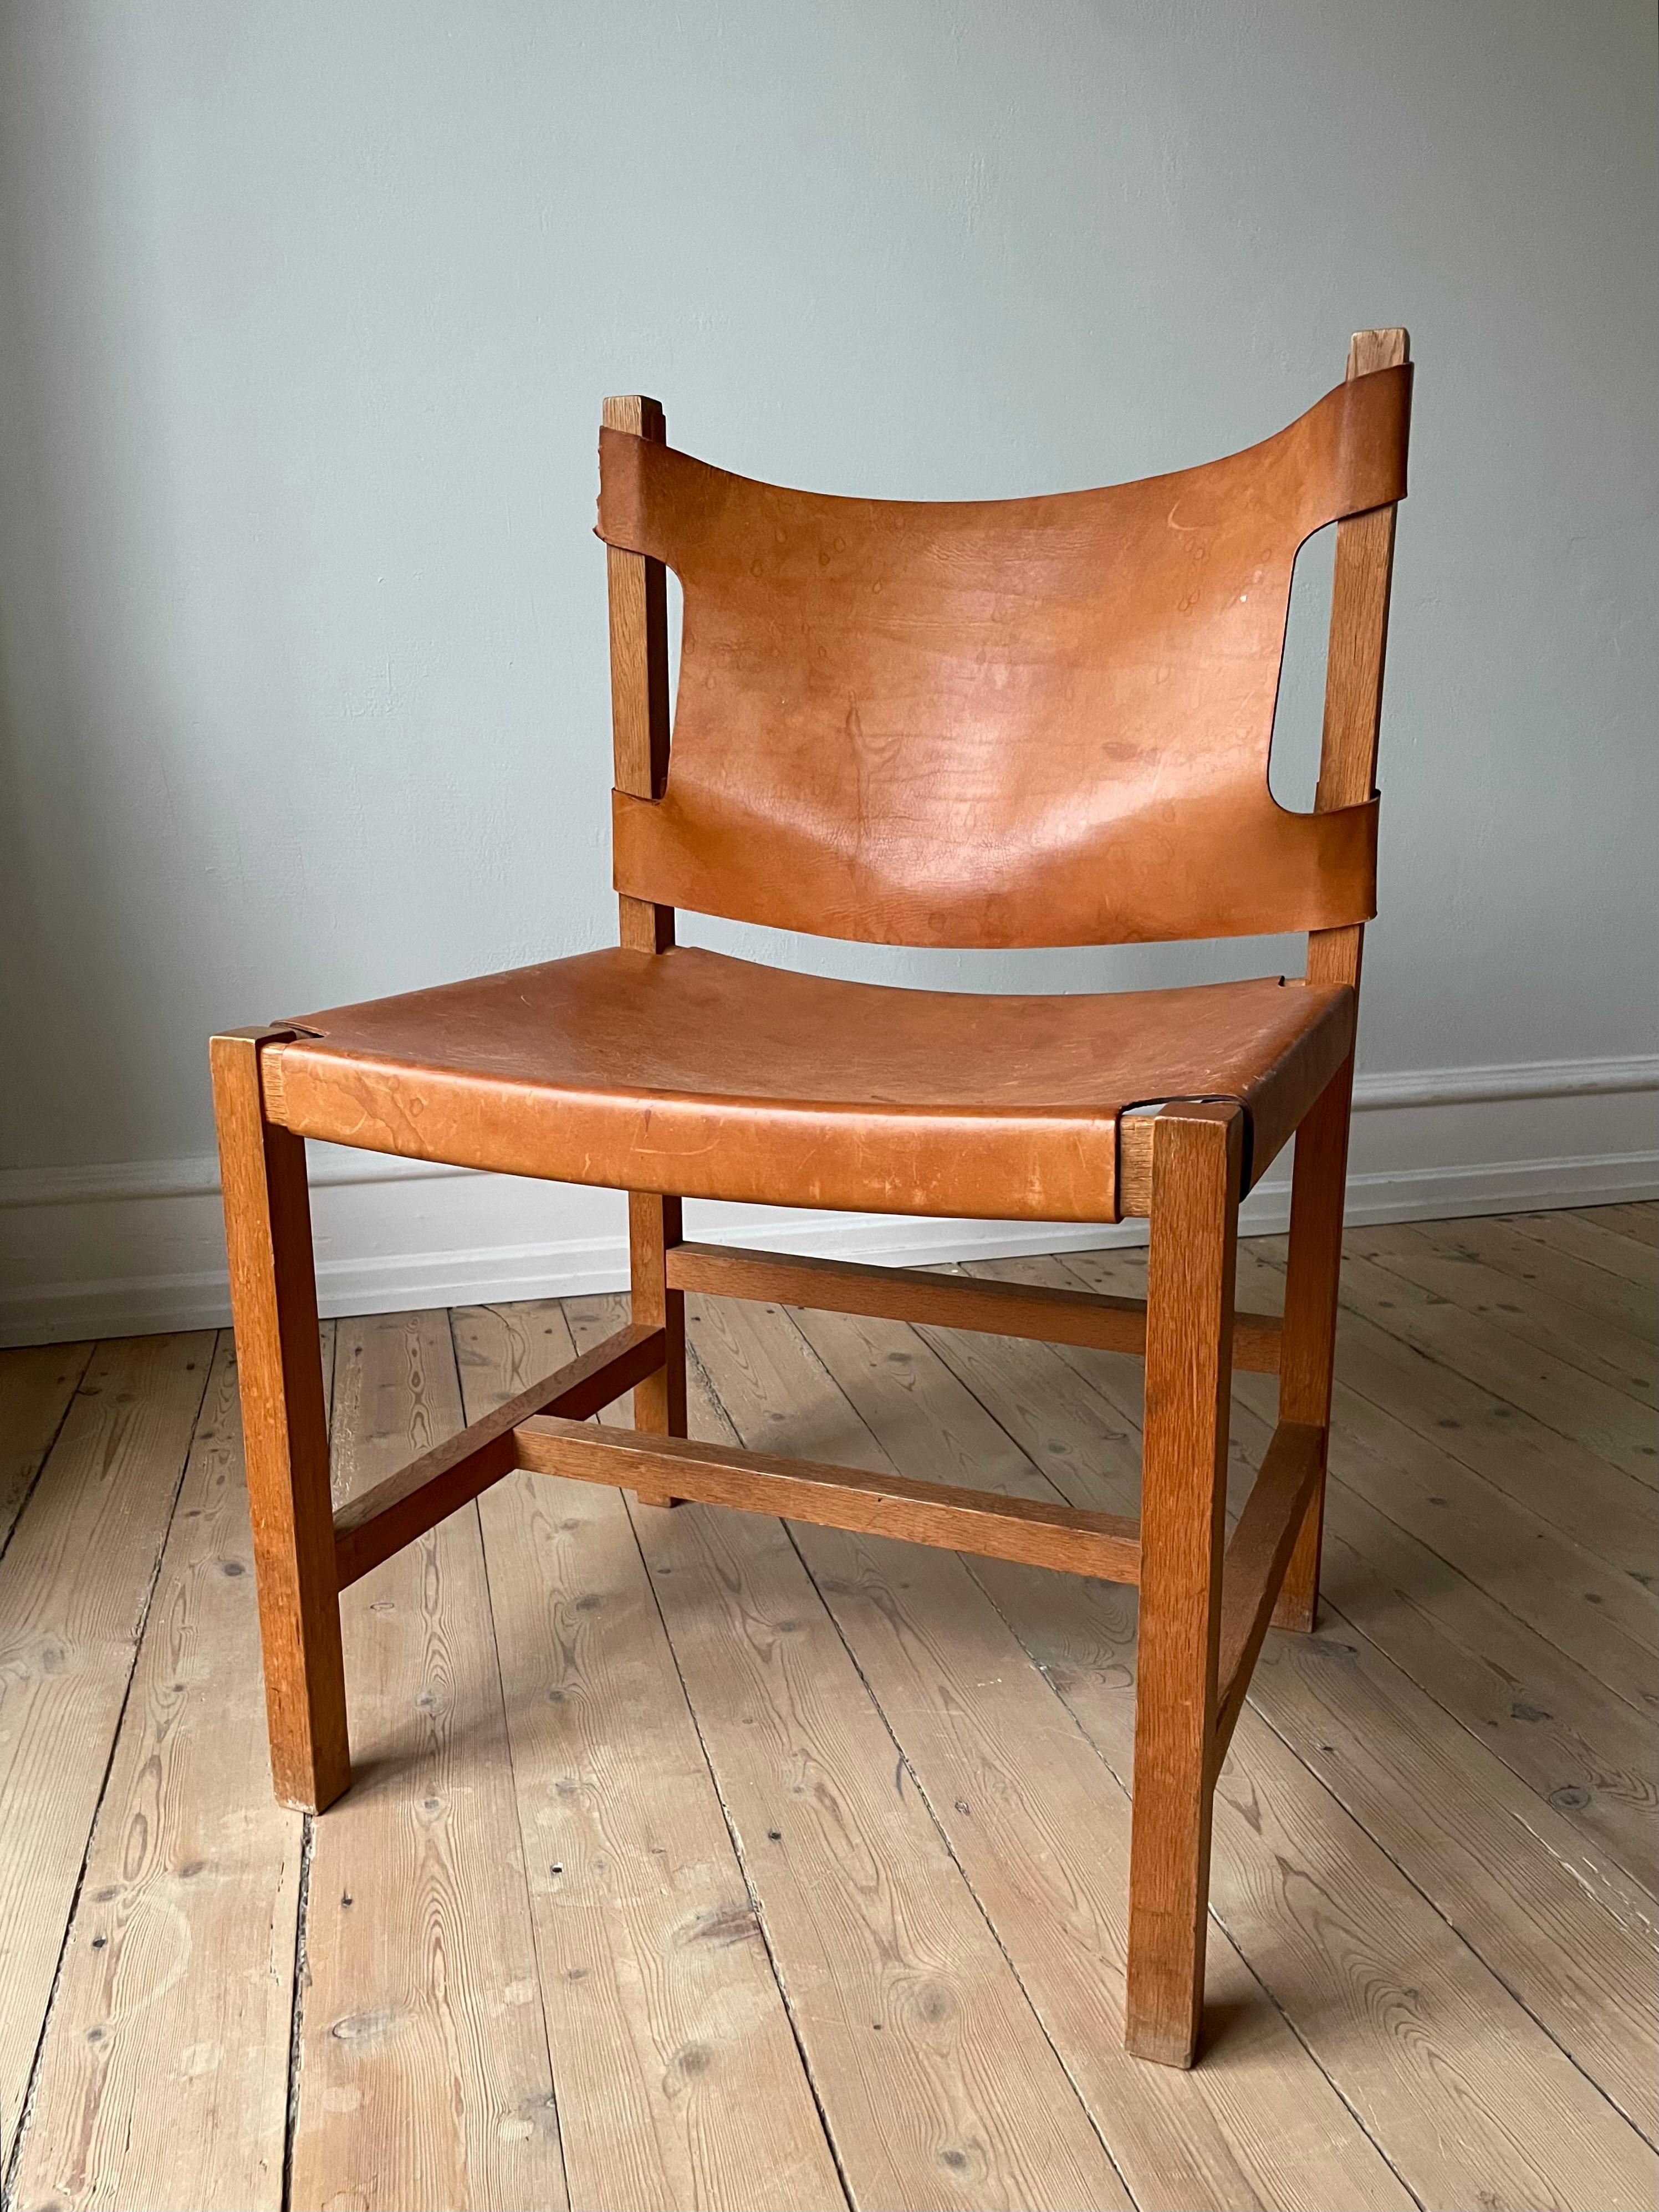 Timeless, classic and functional Danish midcentury modern dining room chair with simple lines and leather seat and leather back. Minimalist and robust silhouette with comfortably soft, warm brown, patinated cognac leather mounted on and draped over